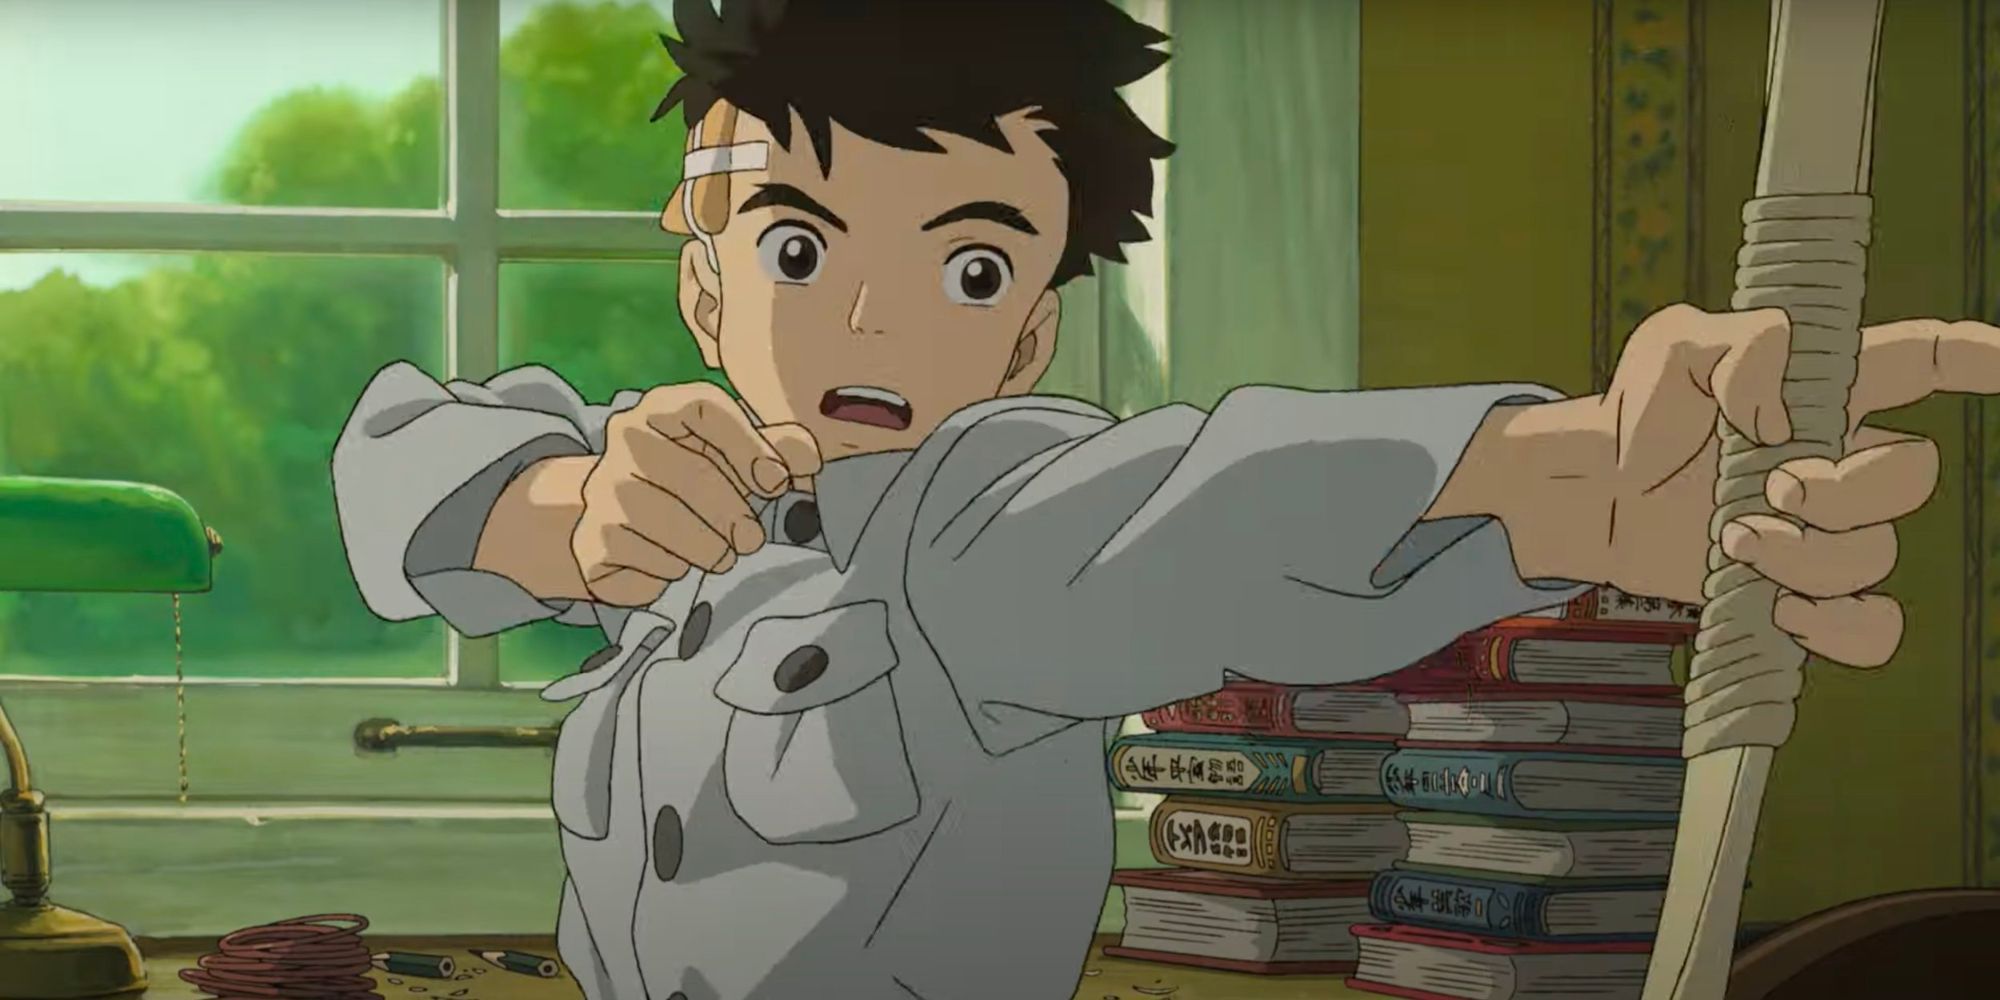 Mahito practices his archery pose in Studio Ghibli's The Boy and The Heron